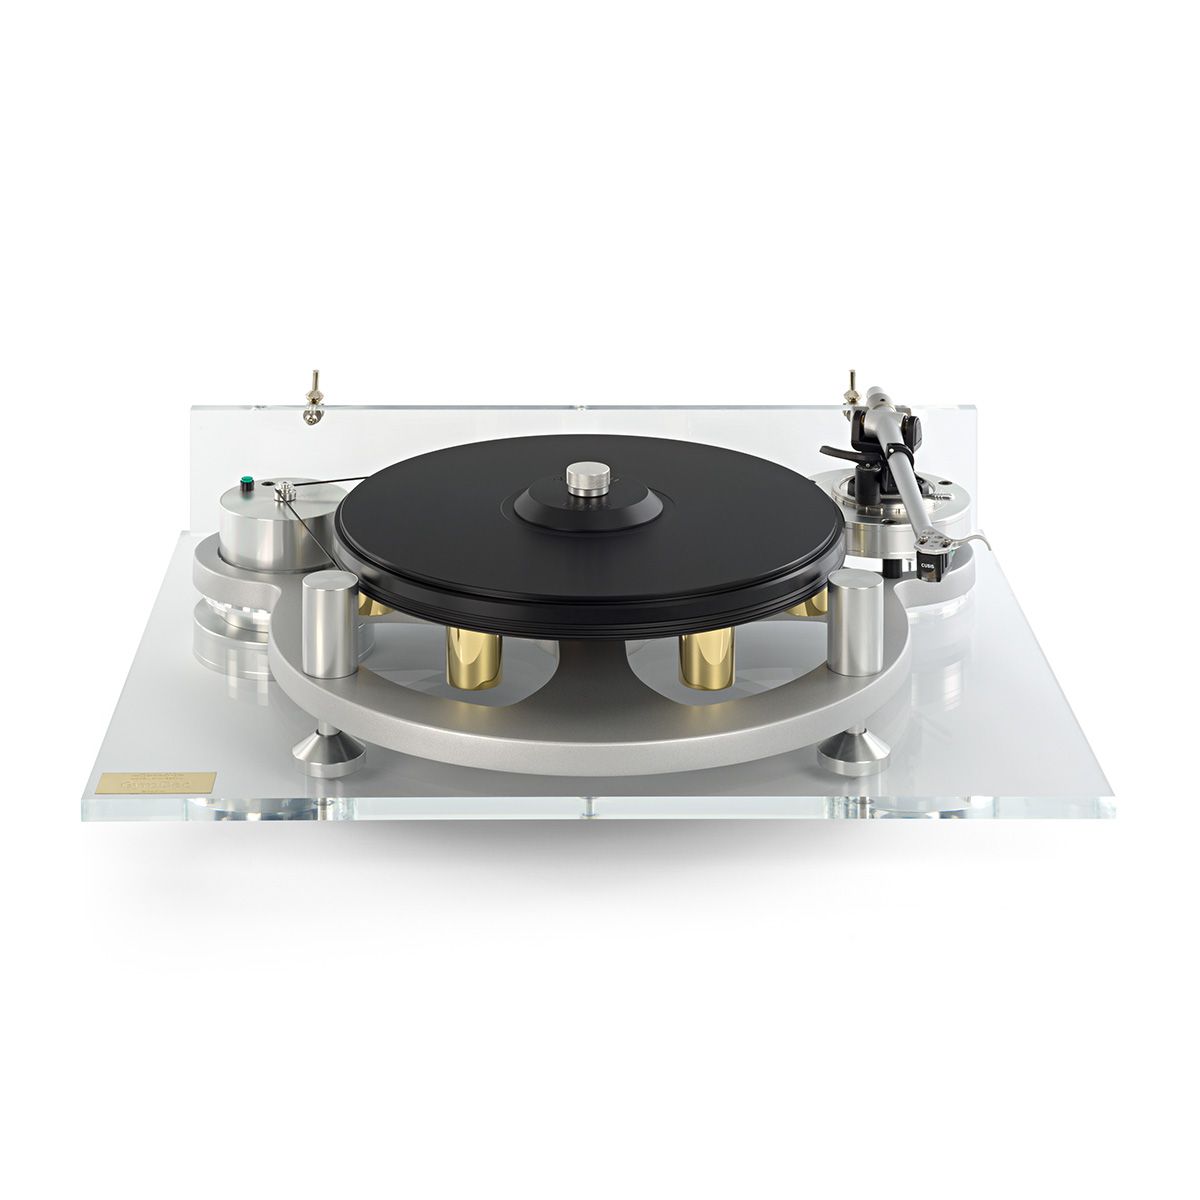 Michell Gyrodec Turntable in silver - top view